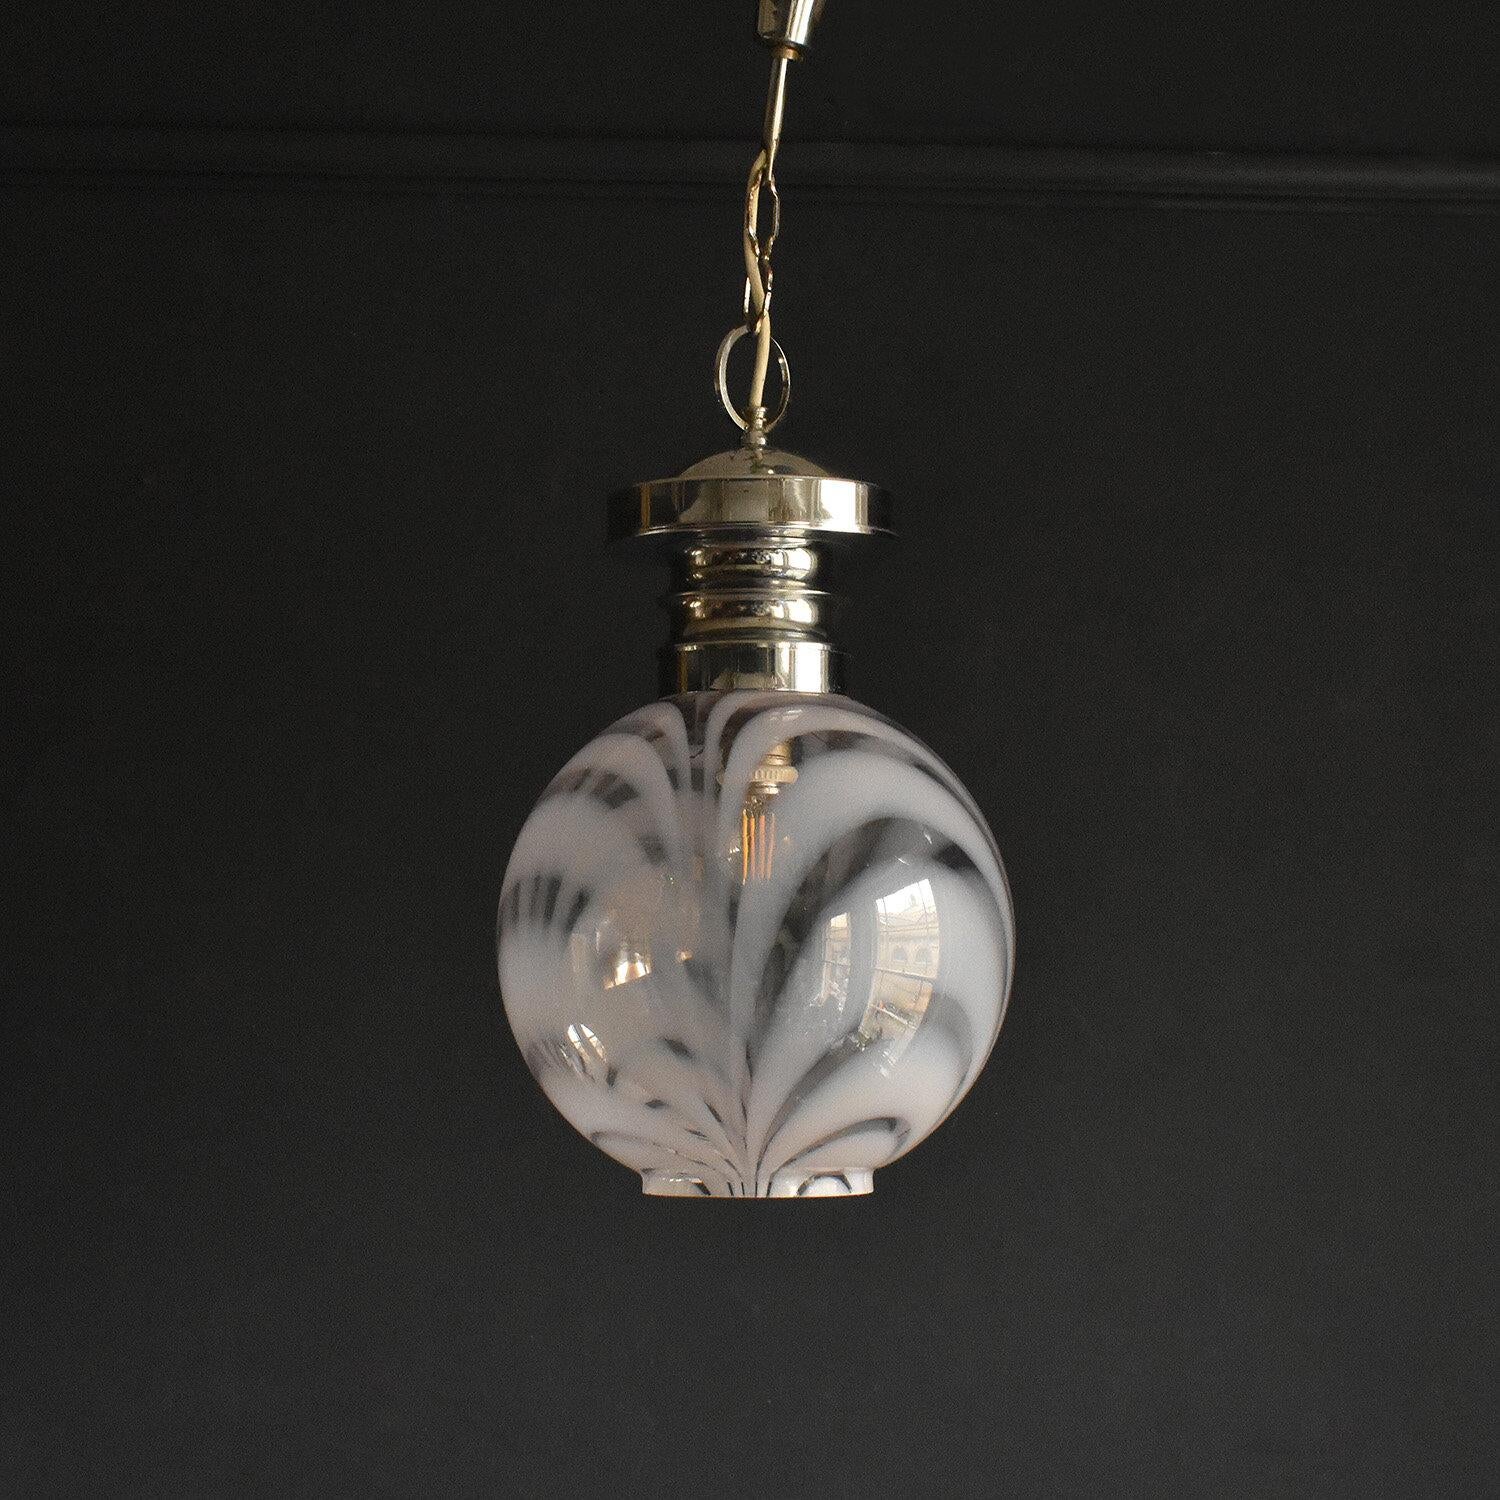 Vintage Ceiling Light Fitting

Wonderful opaline milk glass shade with swirls of clear glass.

Chrome stepped fitting.

In great vintage condition with some minor wear commensurate with age but nothing serious

Rewired and safety tested by our